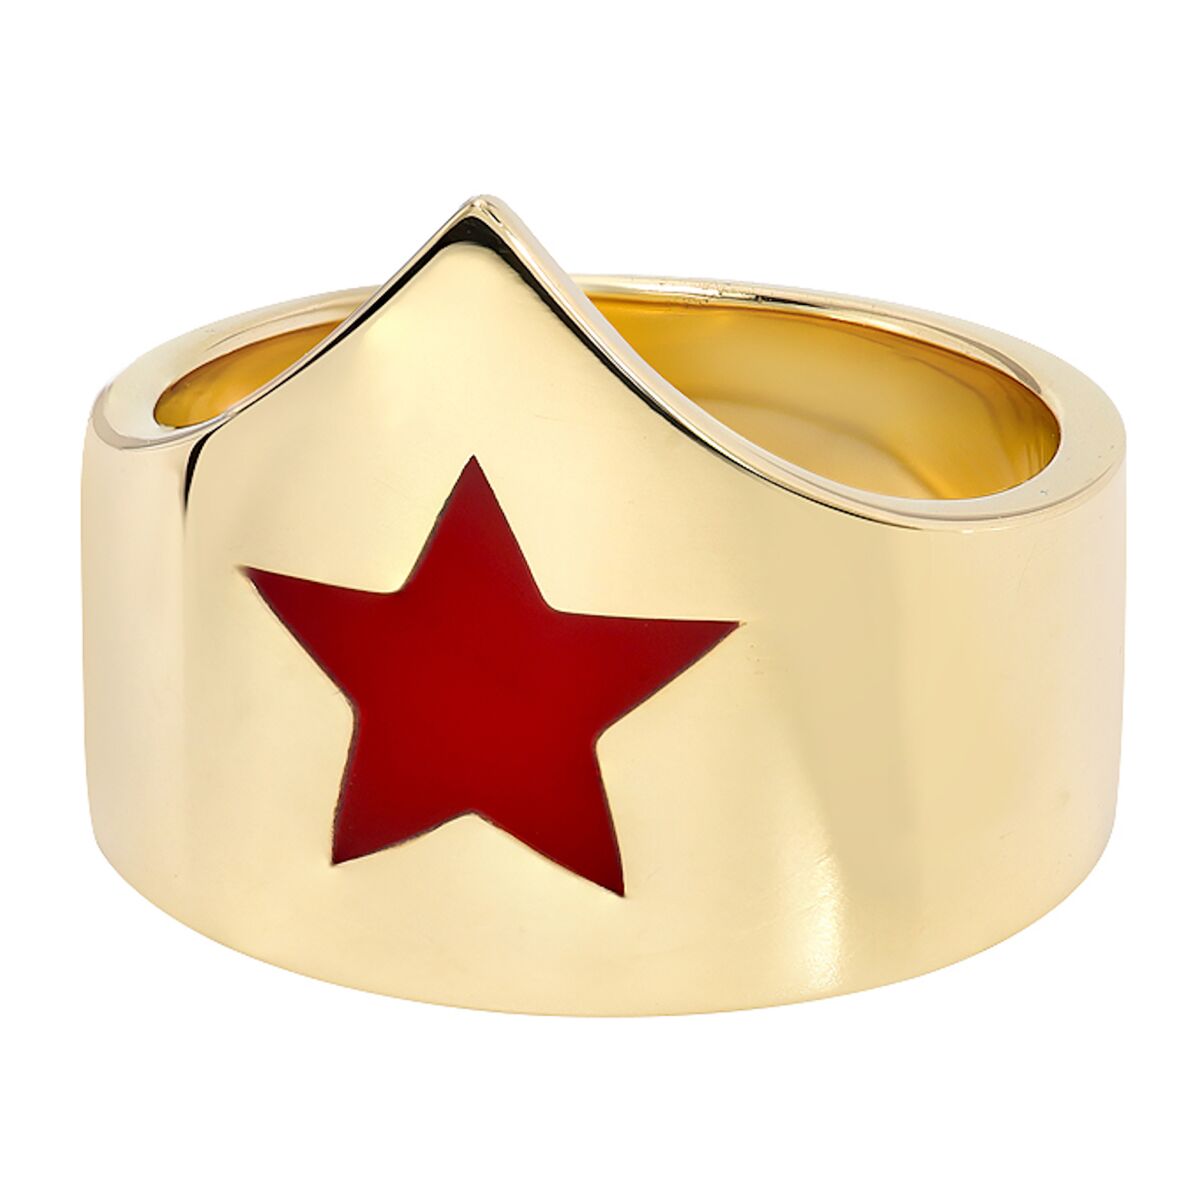 Warrior Woman Crown ring in yellow gold featuring a bright red enamel star